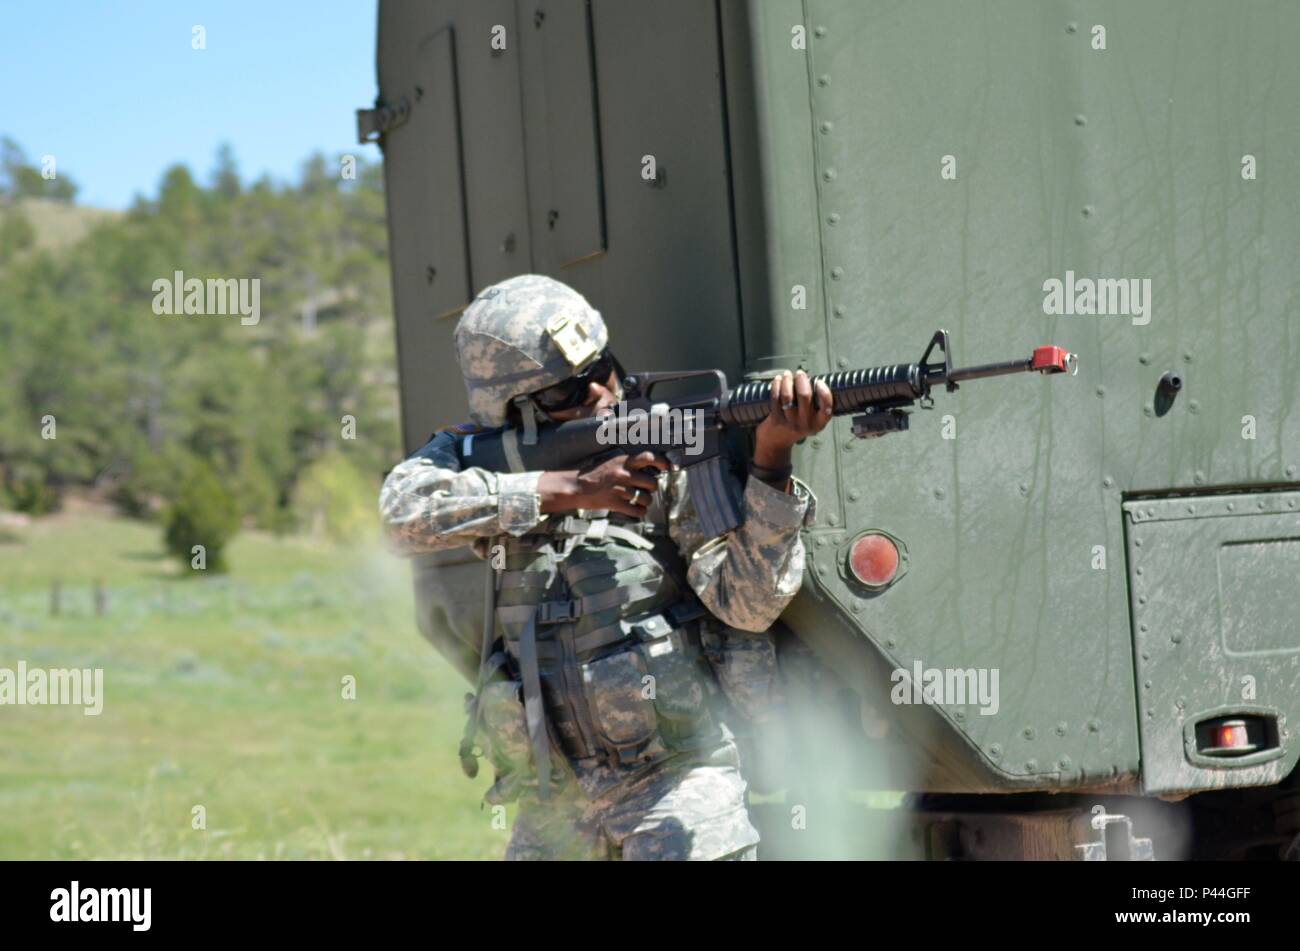 U.S. Army Cpt. Crystal Giocondo of the 396th Medical Company (Ground Ambulance), Army Reserve, engages enemy opposing forces during a simulated convoy ambush in support of the Golden Coyote exercise in Camp Guernsey, Wyo., June 15th, 2016. The Golden Coyote exercise is a three-phase, scenario-driven exercise conducted in the Black Hills of South Dakota and Wyoming, which enables commanders to focus on mission essential task requirements, warrior tasks and battle drills. (U.S. Army photo by Pfc. Michael Britt/ Released) Stock Photo